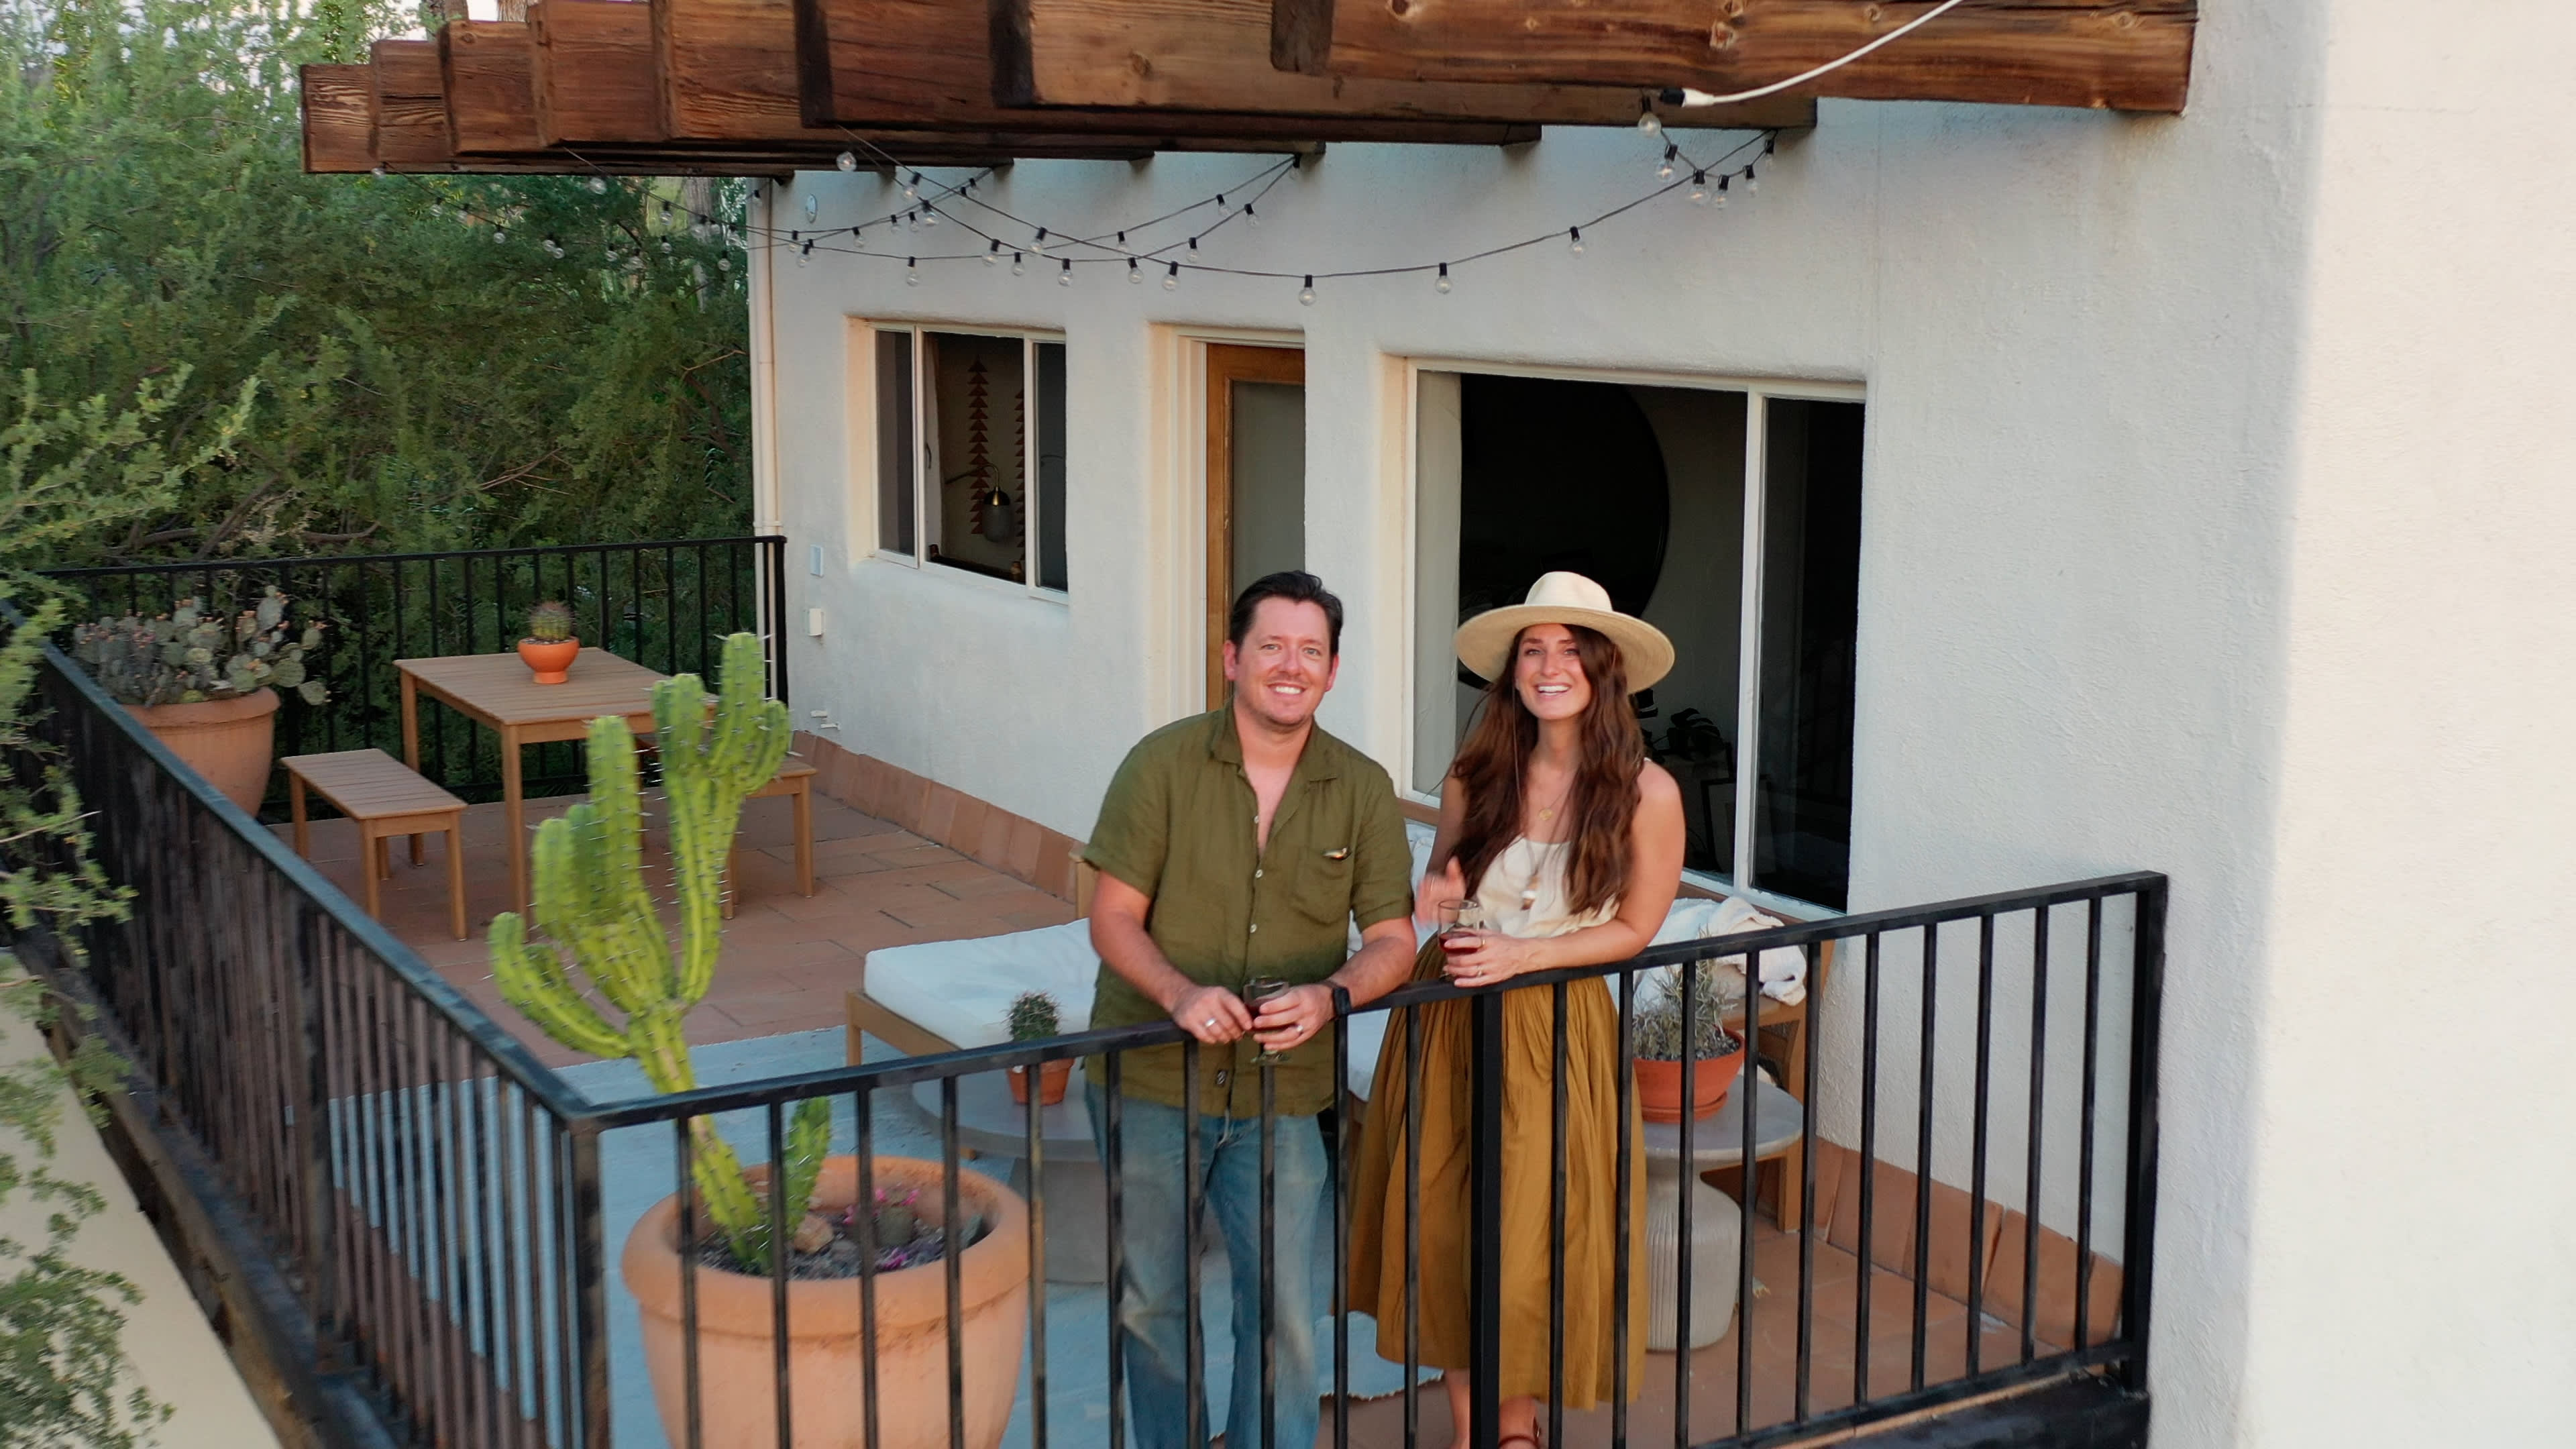 A married couple spent over $1 million to buy and renovate an abandoned Arizona lodge